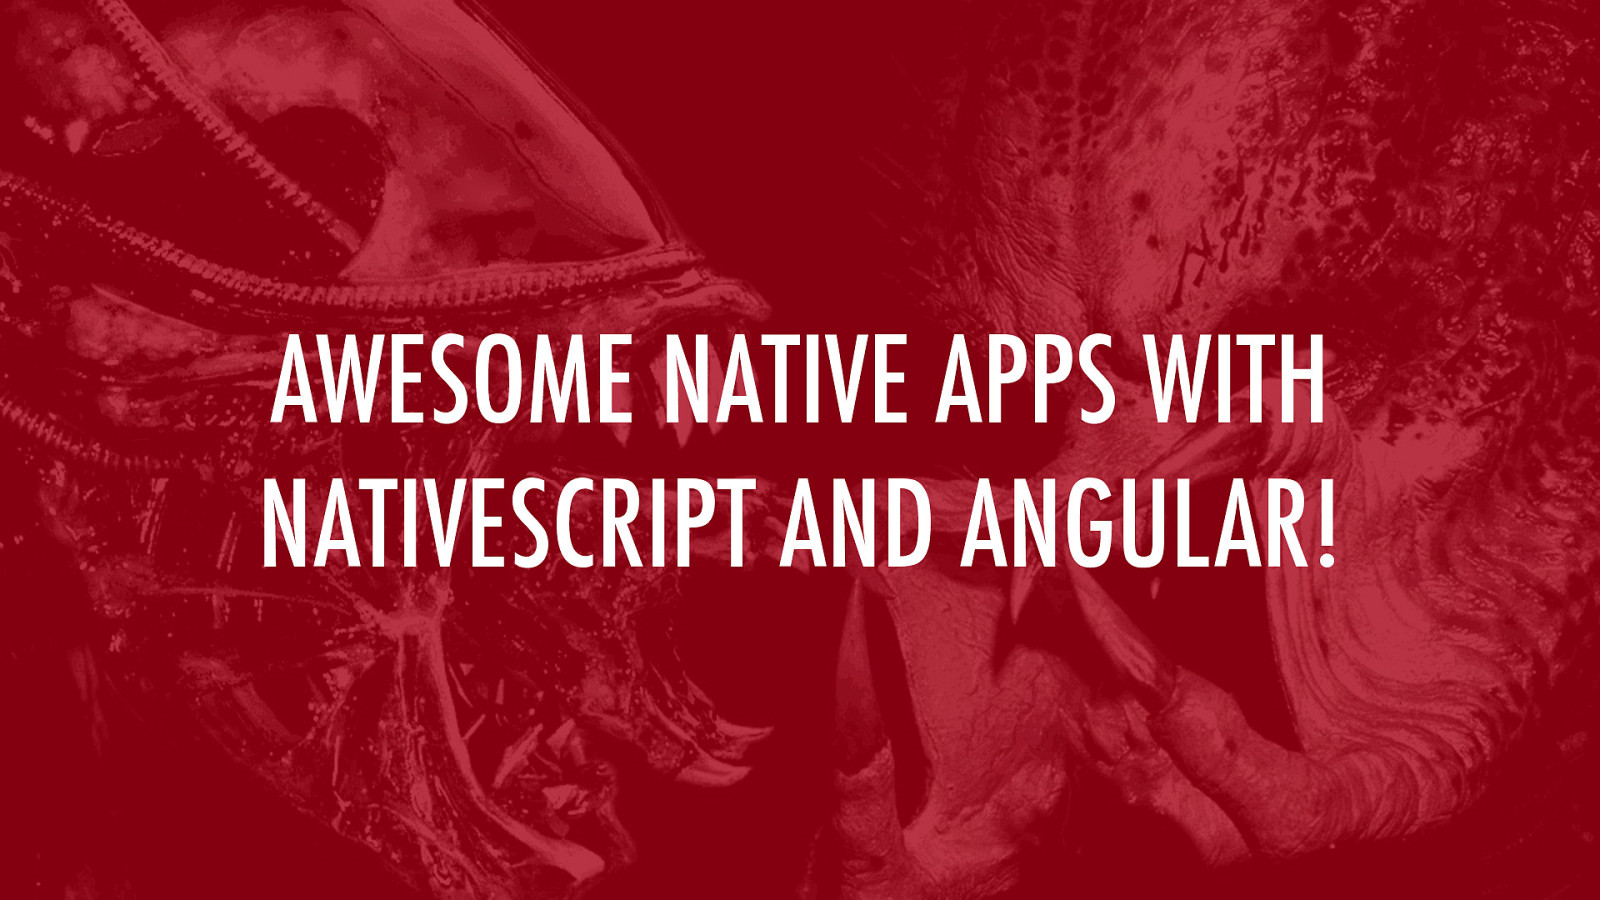 Awesome native apps with NativeScript and Angular!